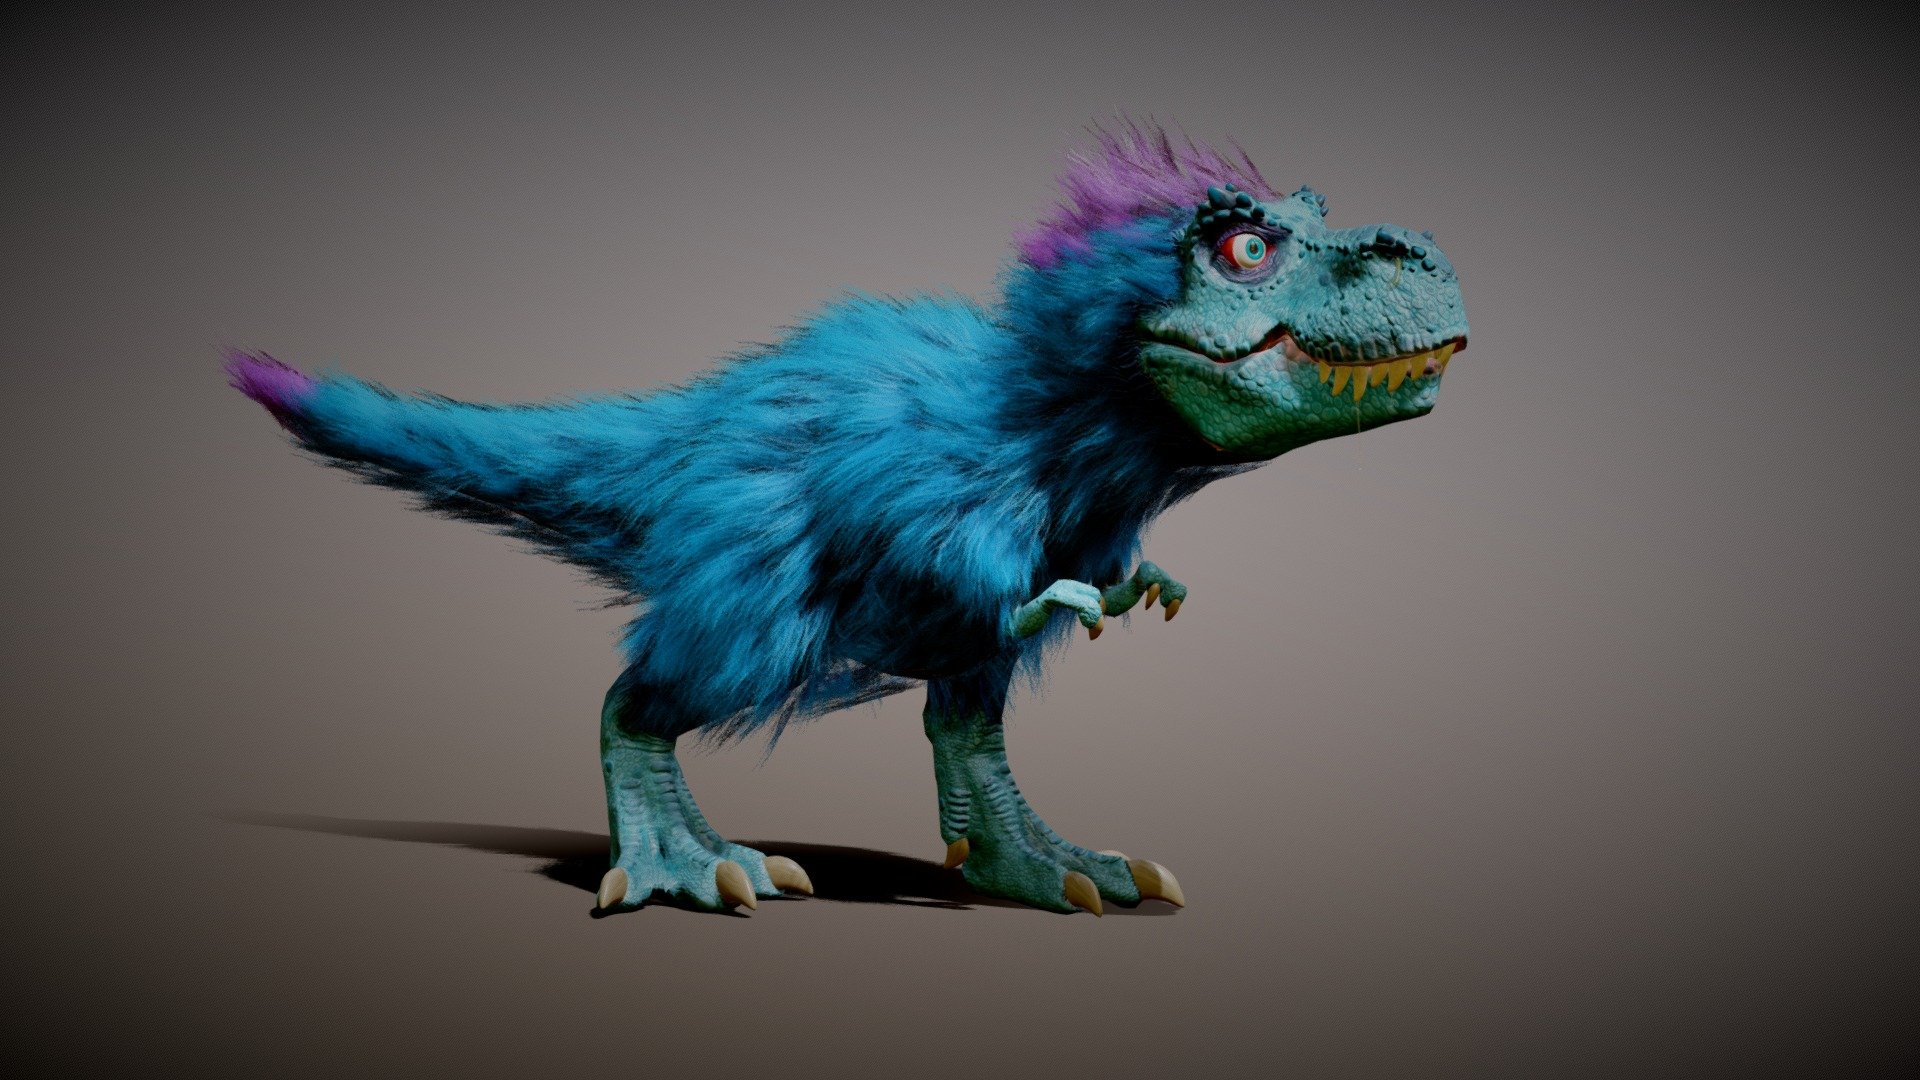 This 3D model of a cartoon-style Tyrannosaurus is a fun and playful interpretation of the prehistoric giant. With exaggerated features and bright colors, this T-Rex is sure to capture the attention of any viewer. The model features a highly detailed and textured body, with individual scales and bumps that add to its realistic appearance. The cartoon-style of the model is emphasized through the large, expressive eyes and the prominent, toothy grin. The model is fully rigged and ready for animation, allowing for endless possibilities for creative projects. This T-Rex is perfect for use in children's media, educational materials, and games, or as a fun addition to any 3D model collection.

Createde in Zbrush core, Blender and Substance Painter

Original blender file in the Zip folder uploaded!

Textures 4096x4096:* - body: albedo, roughness, Ambient occlusion, normal - claws, eyes and teeth: albedo, roughness, Ambient occlusion, normal, opacity - feathers: opacity, roughness, Ambient Occlusion - Trex (Cartoon version) 3.3 - Buy Royalty Free 3D model by creatureFab (@3dCoast) 3d model